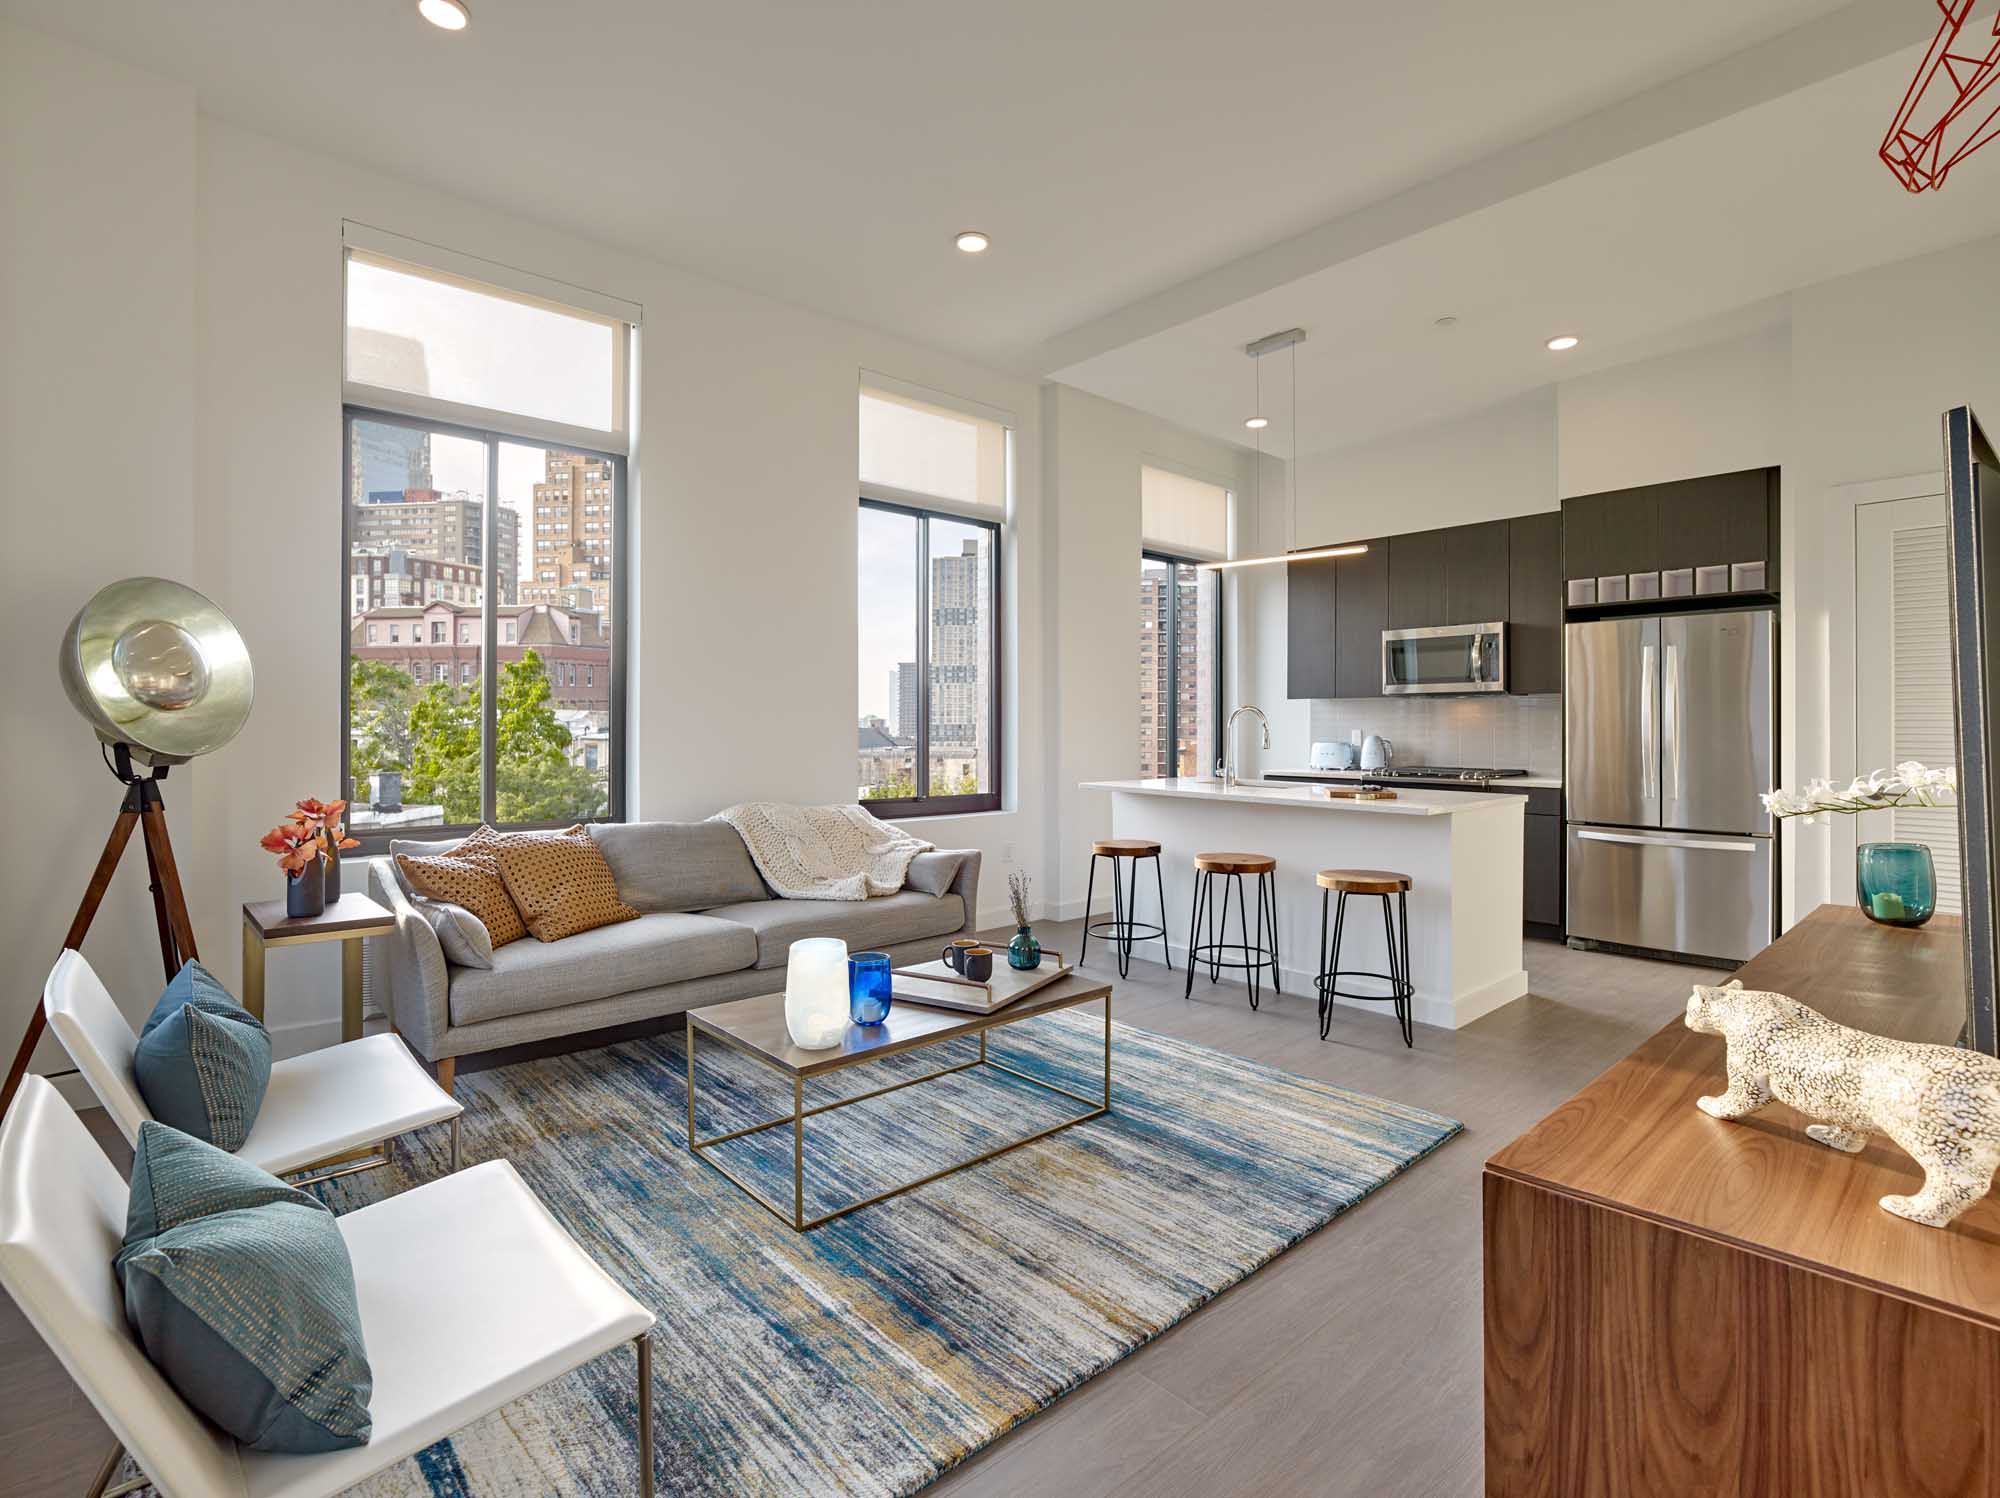 Modern City Apartment with Open Layout, Living room with bar seating leads to kitchen.